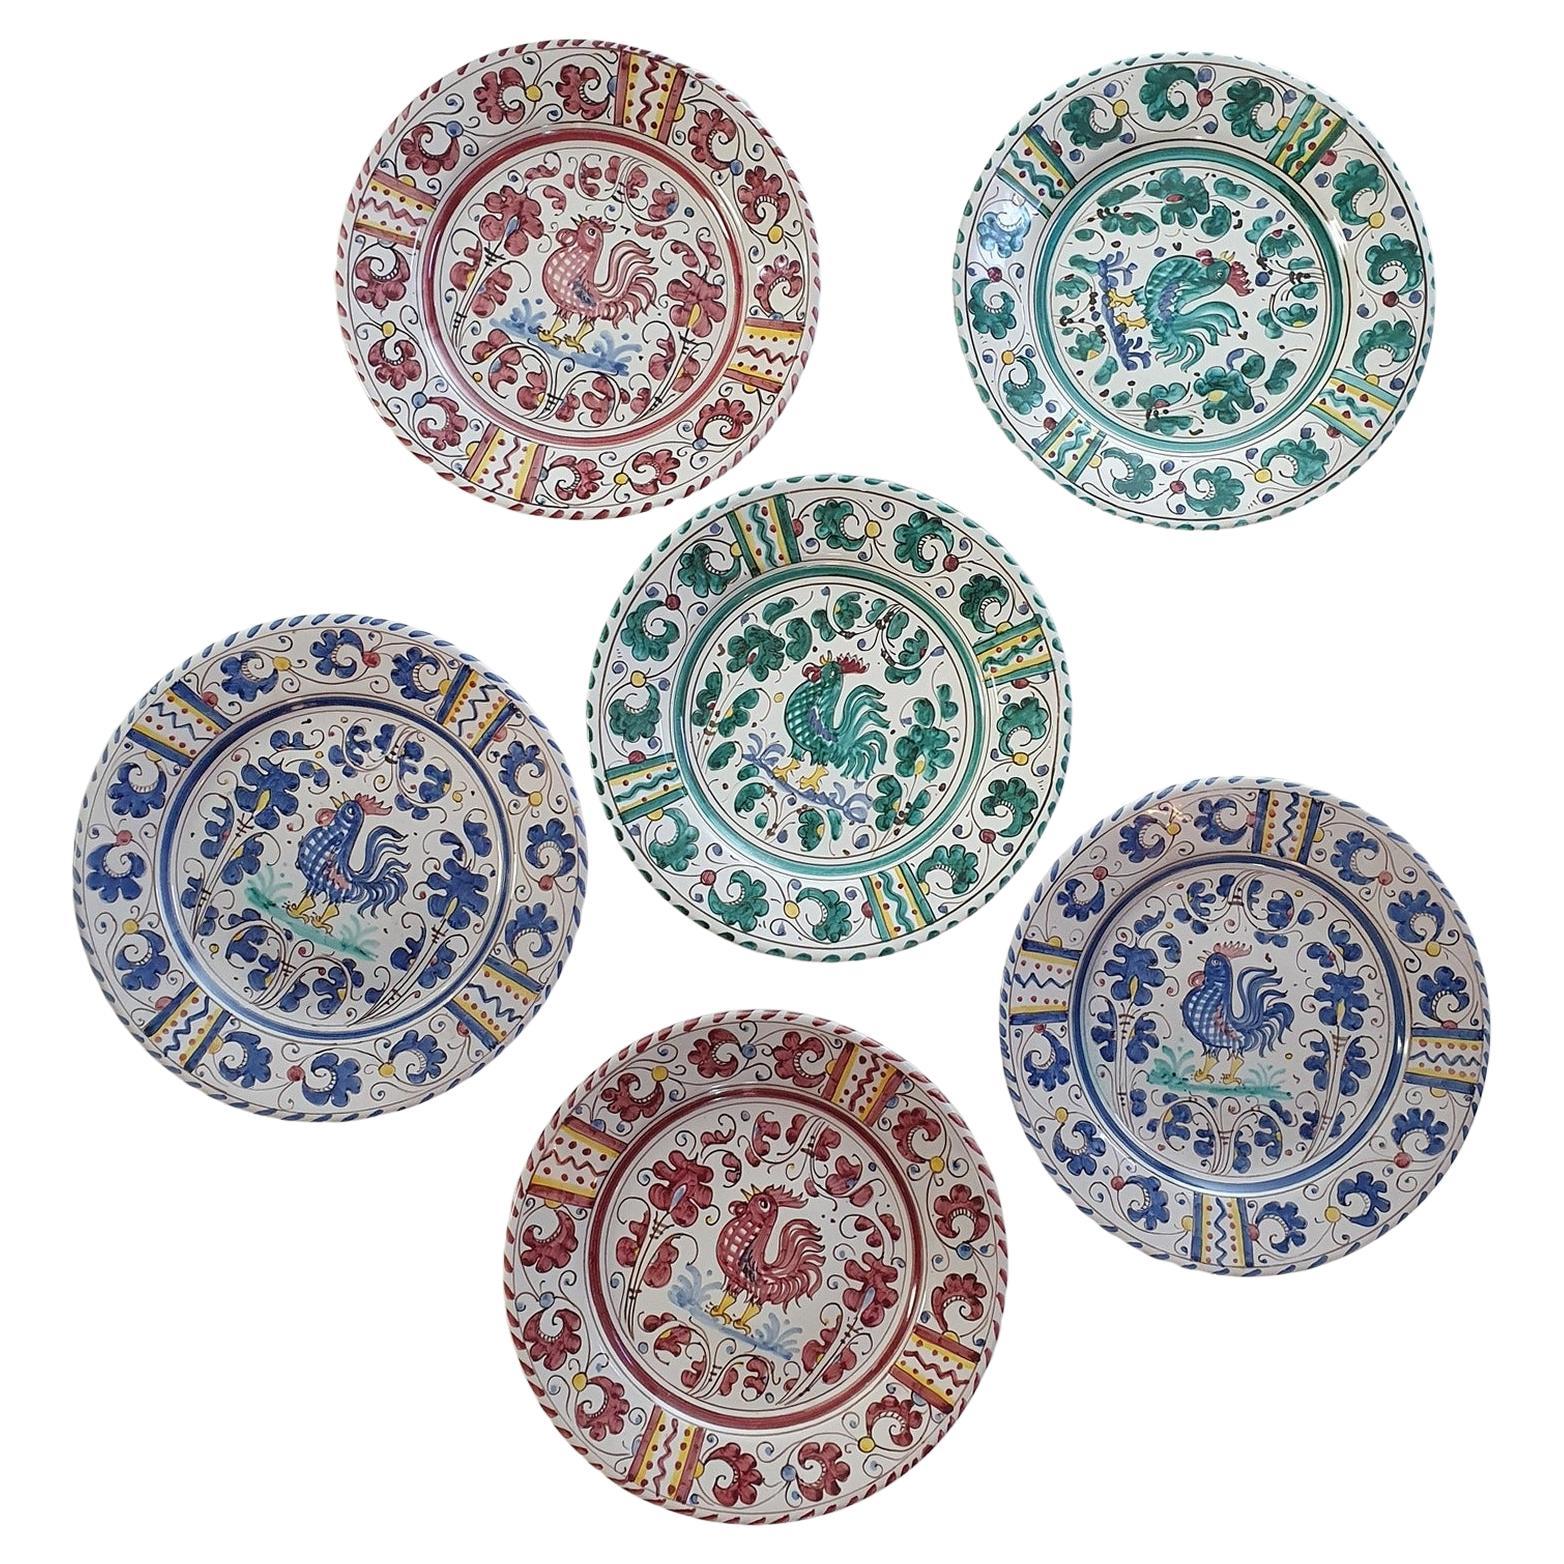 Set of six Rooster Dinner Plates by Deruta Italy